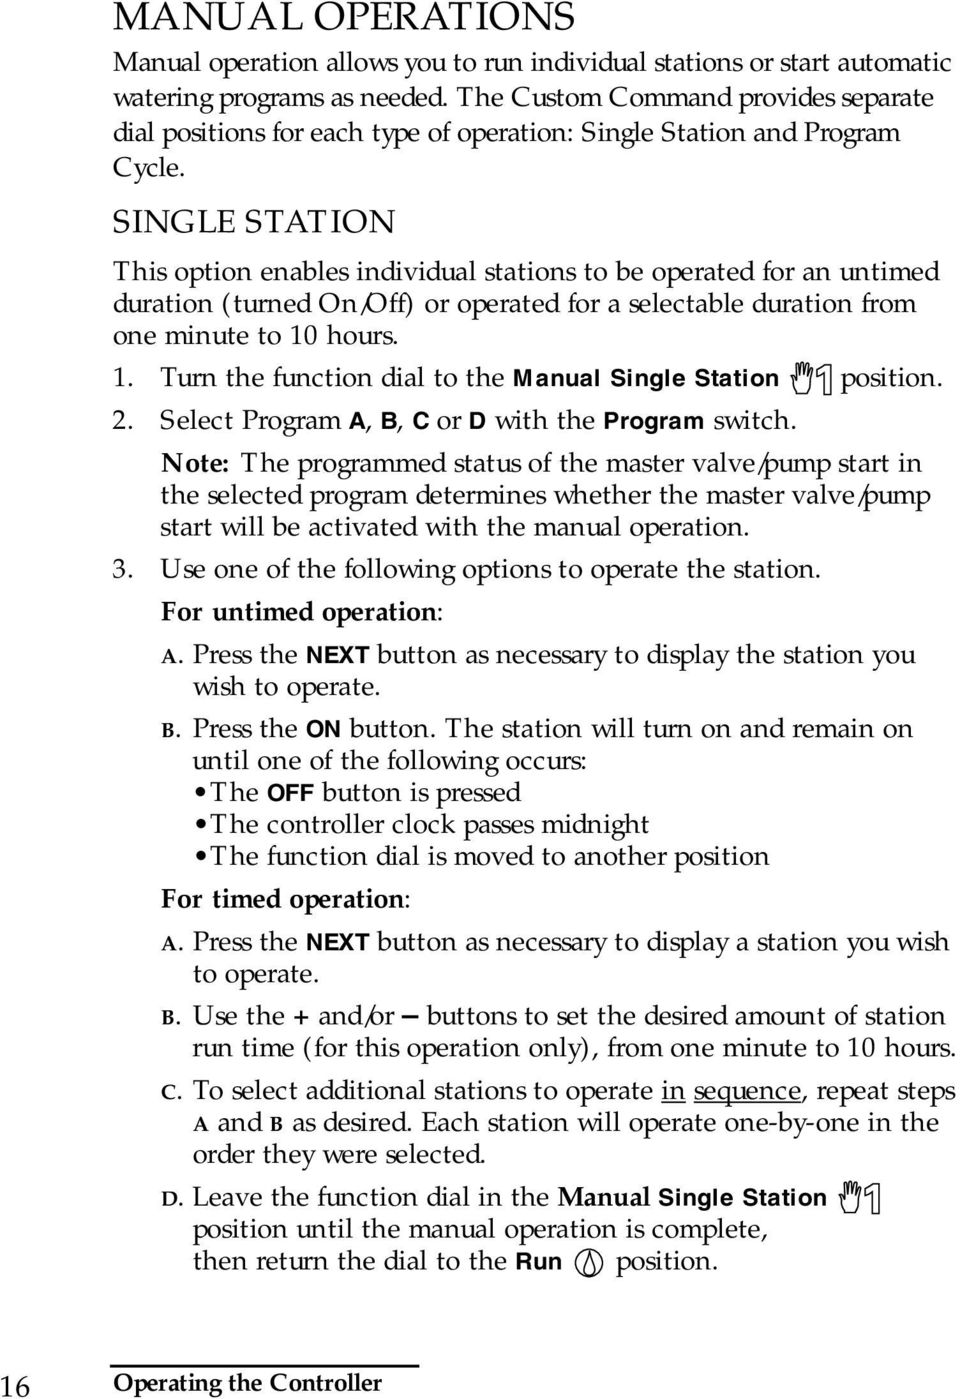 SINGLE STATION This option enables individual stations to be operated for an untimed duration (turned On/Off) or operated for a selectable duration from one minute to 10